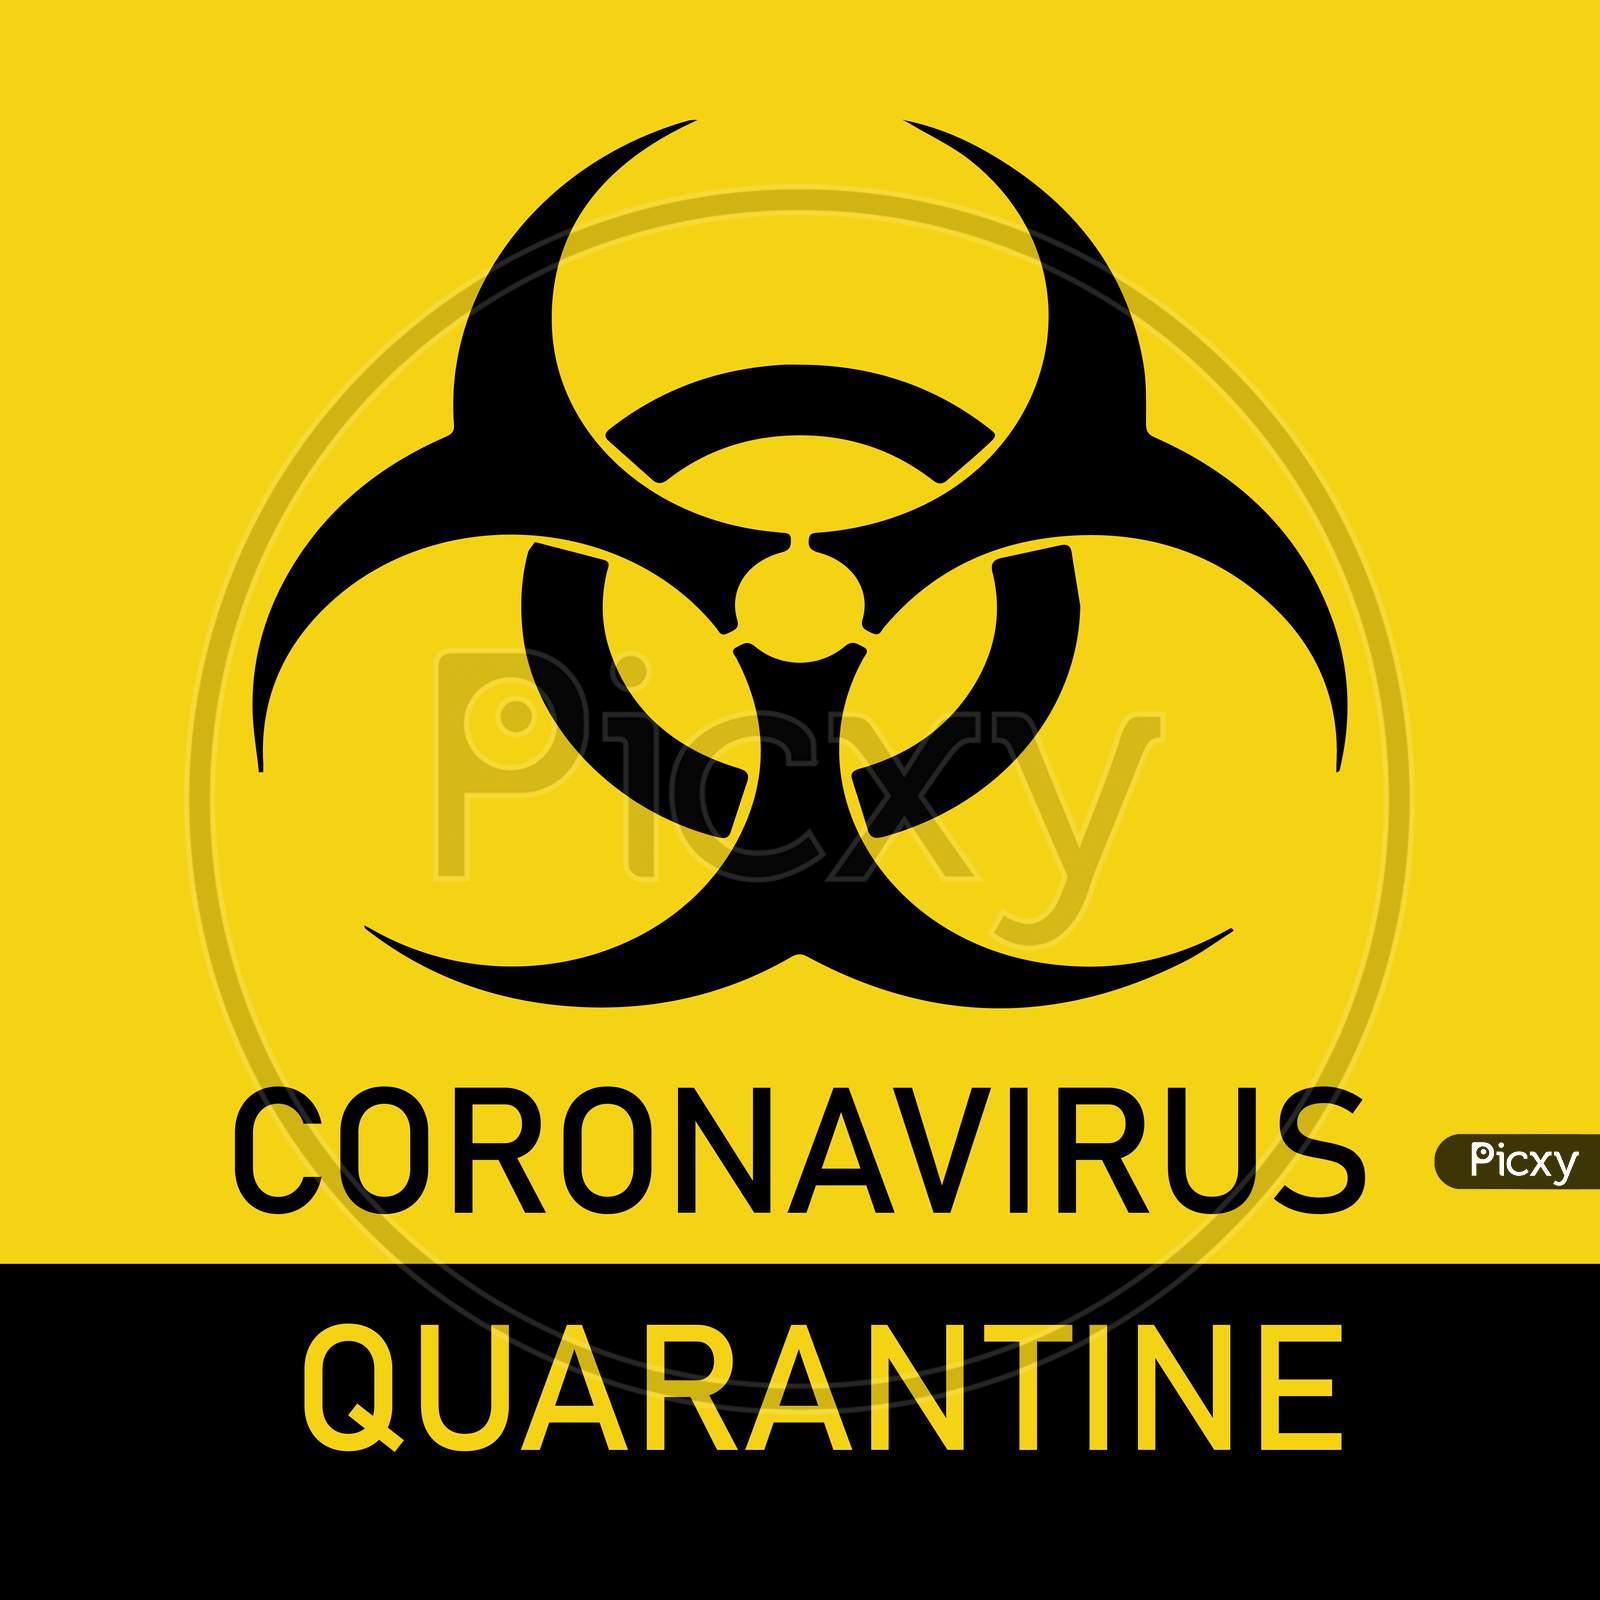 Coronavirus Biohazard Warning Quarantine Poster. Vector Template For Posters, Banners, Advertising. Stop Covid-19. Danger Of Infection From Coronavirus Sign. Concept.